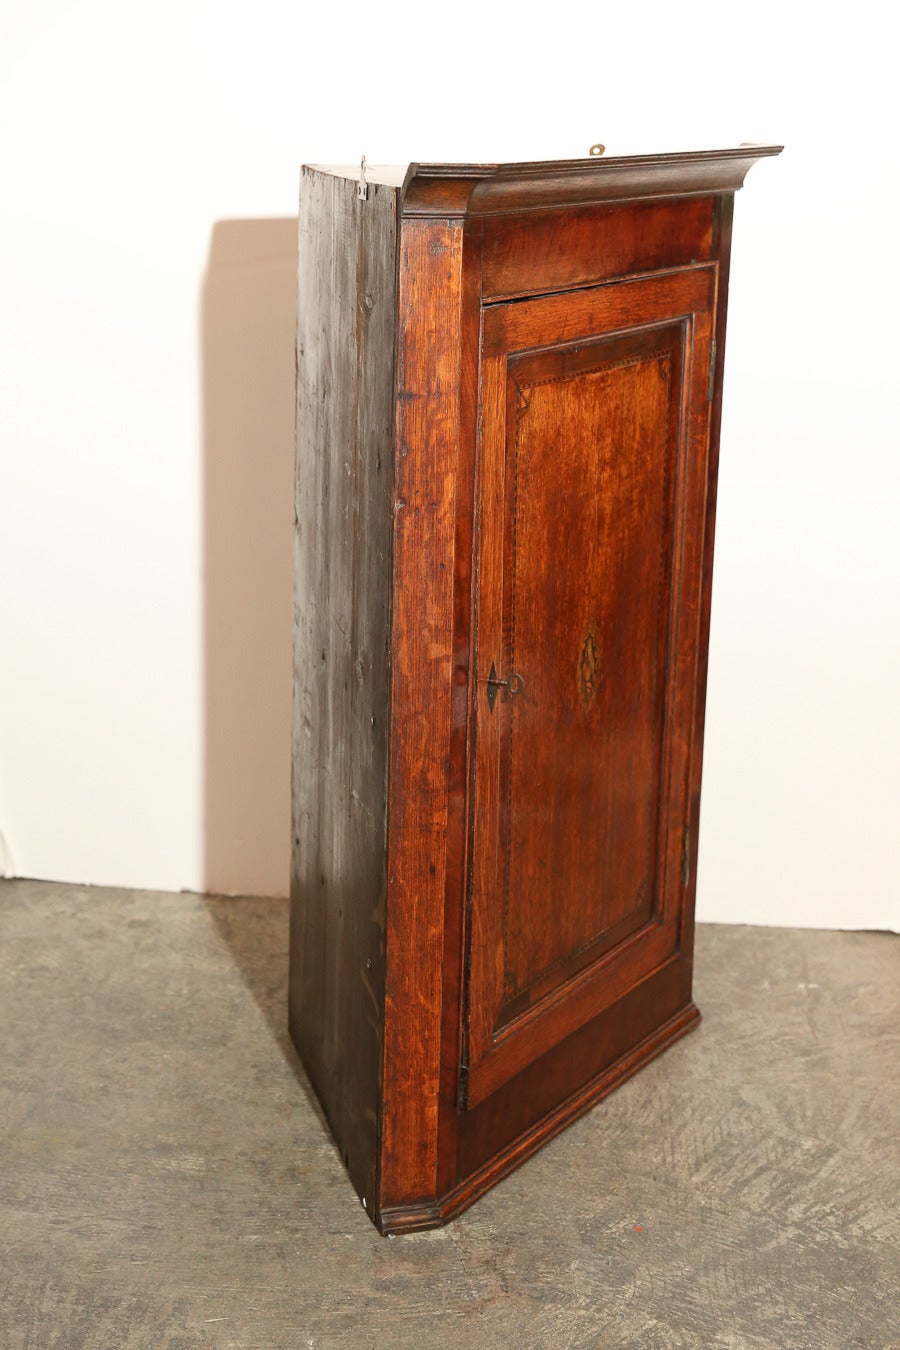 Antique English Oak Corner Cabinet with small inlay in center of door.

Two scalloped edge shelves.